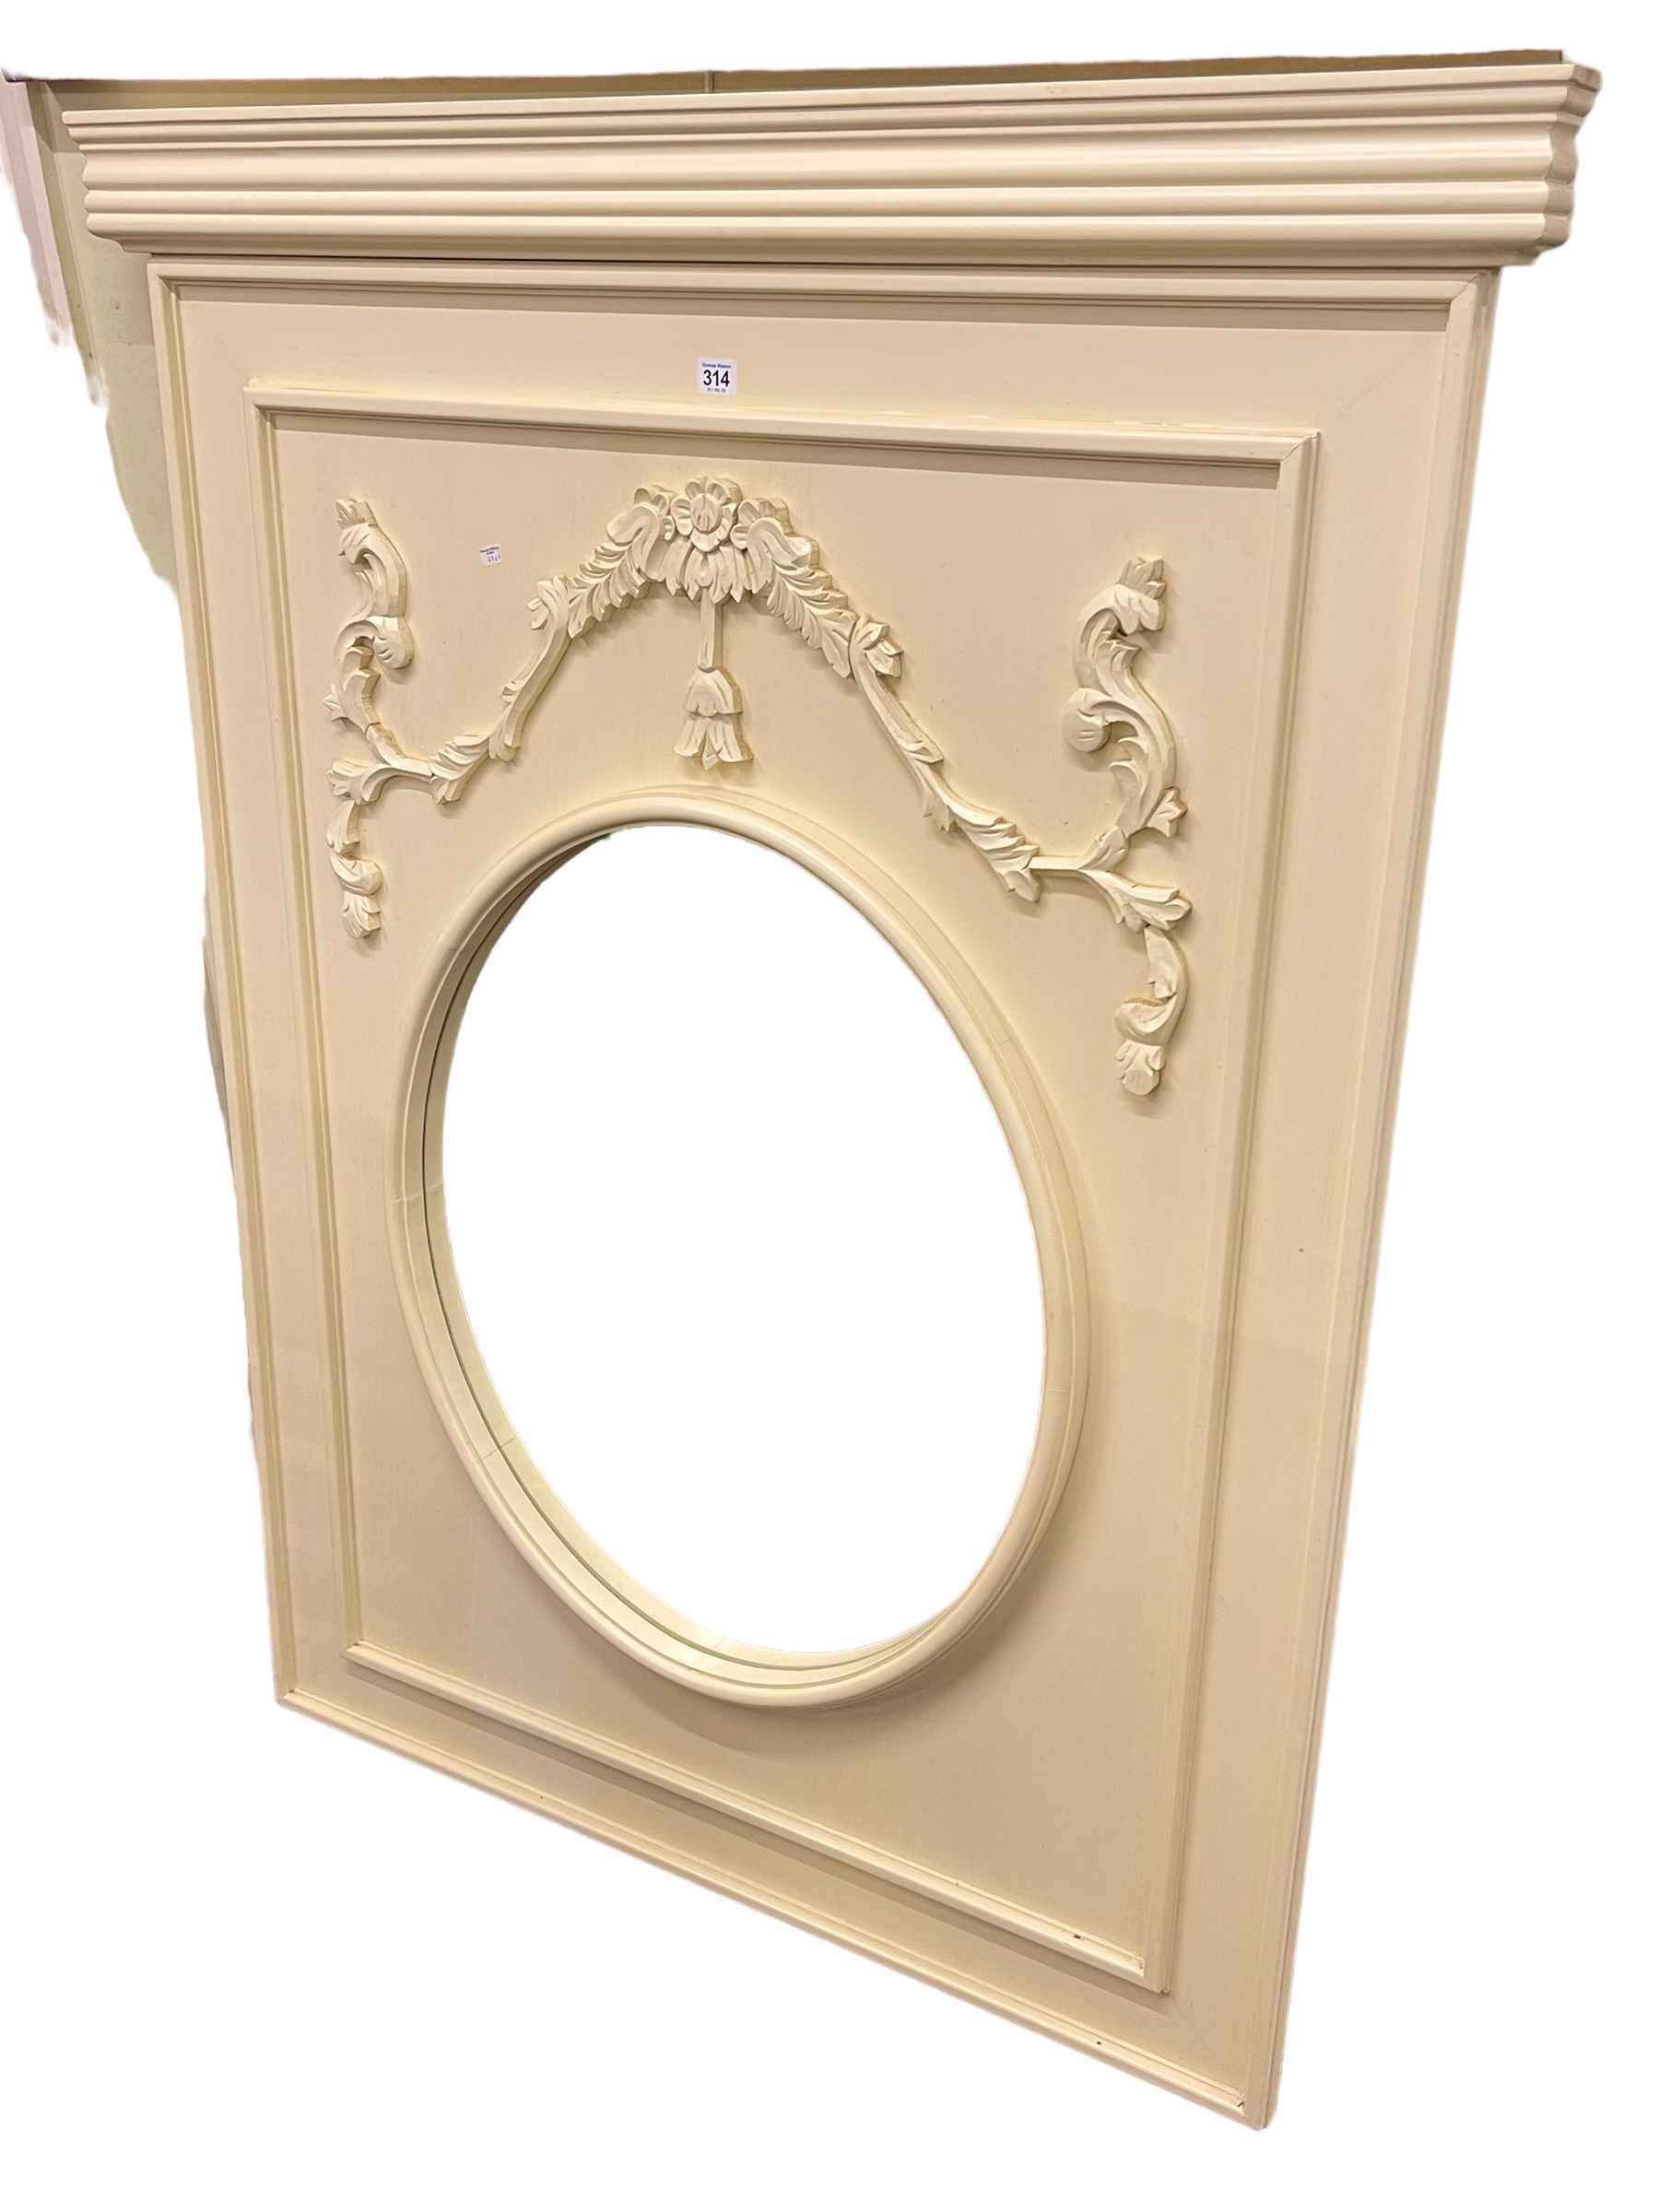 Contemporary painted overmantel with circular inset mirror, 139cm by 107.5cm.